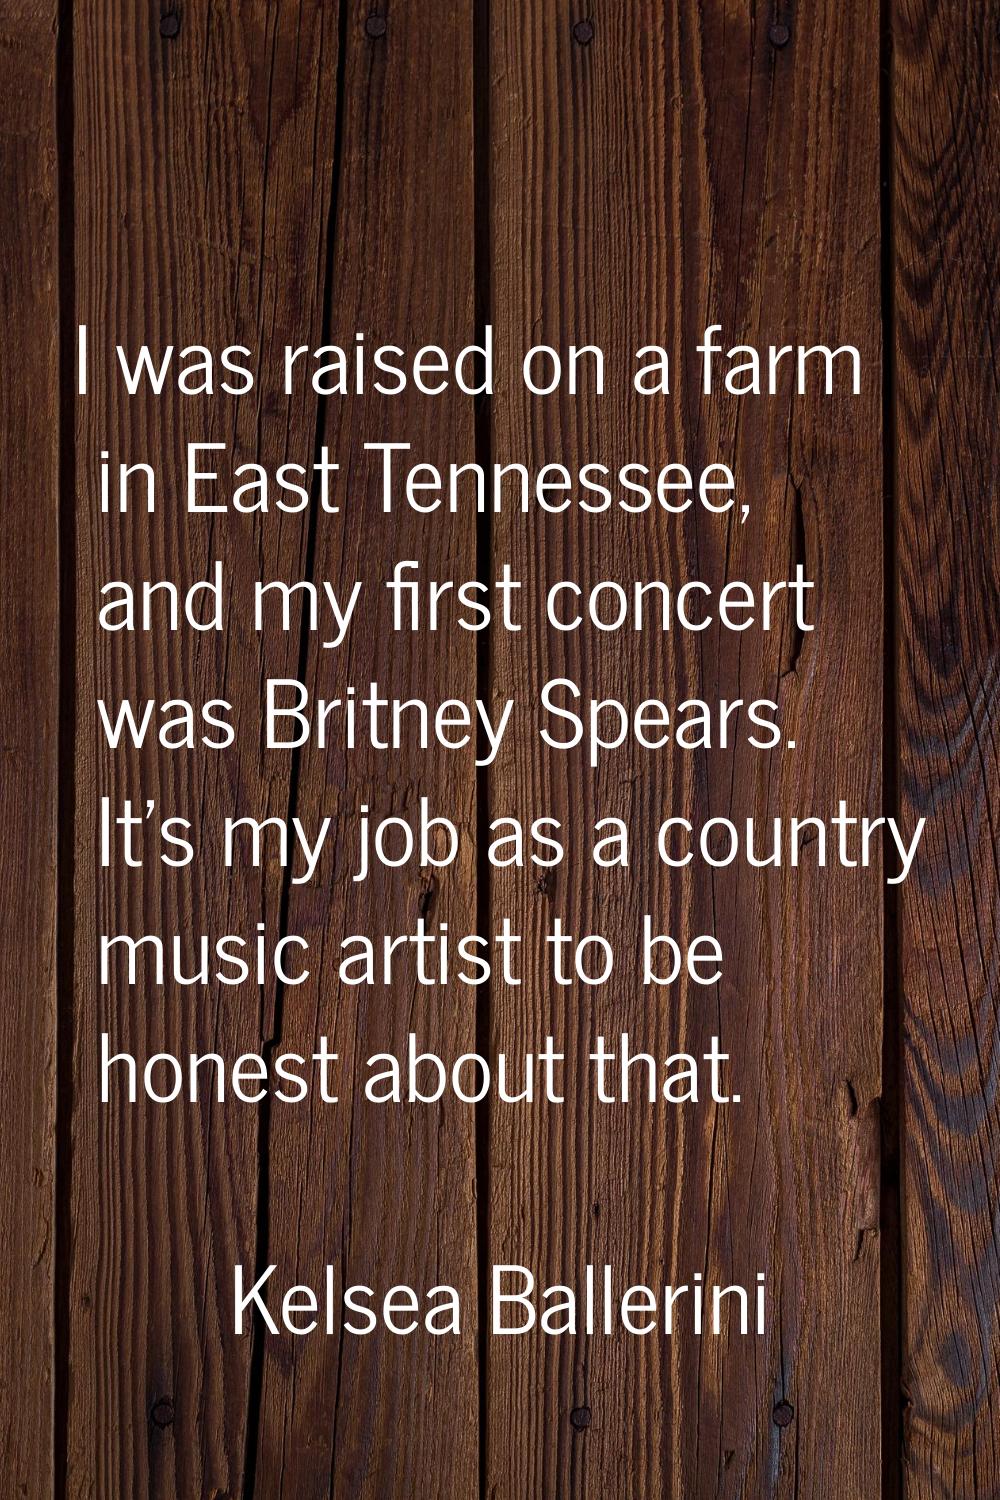 I was raised on a farm in East Tennessee, and my first concert was Britney Spears. It's my job as a